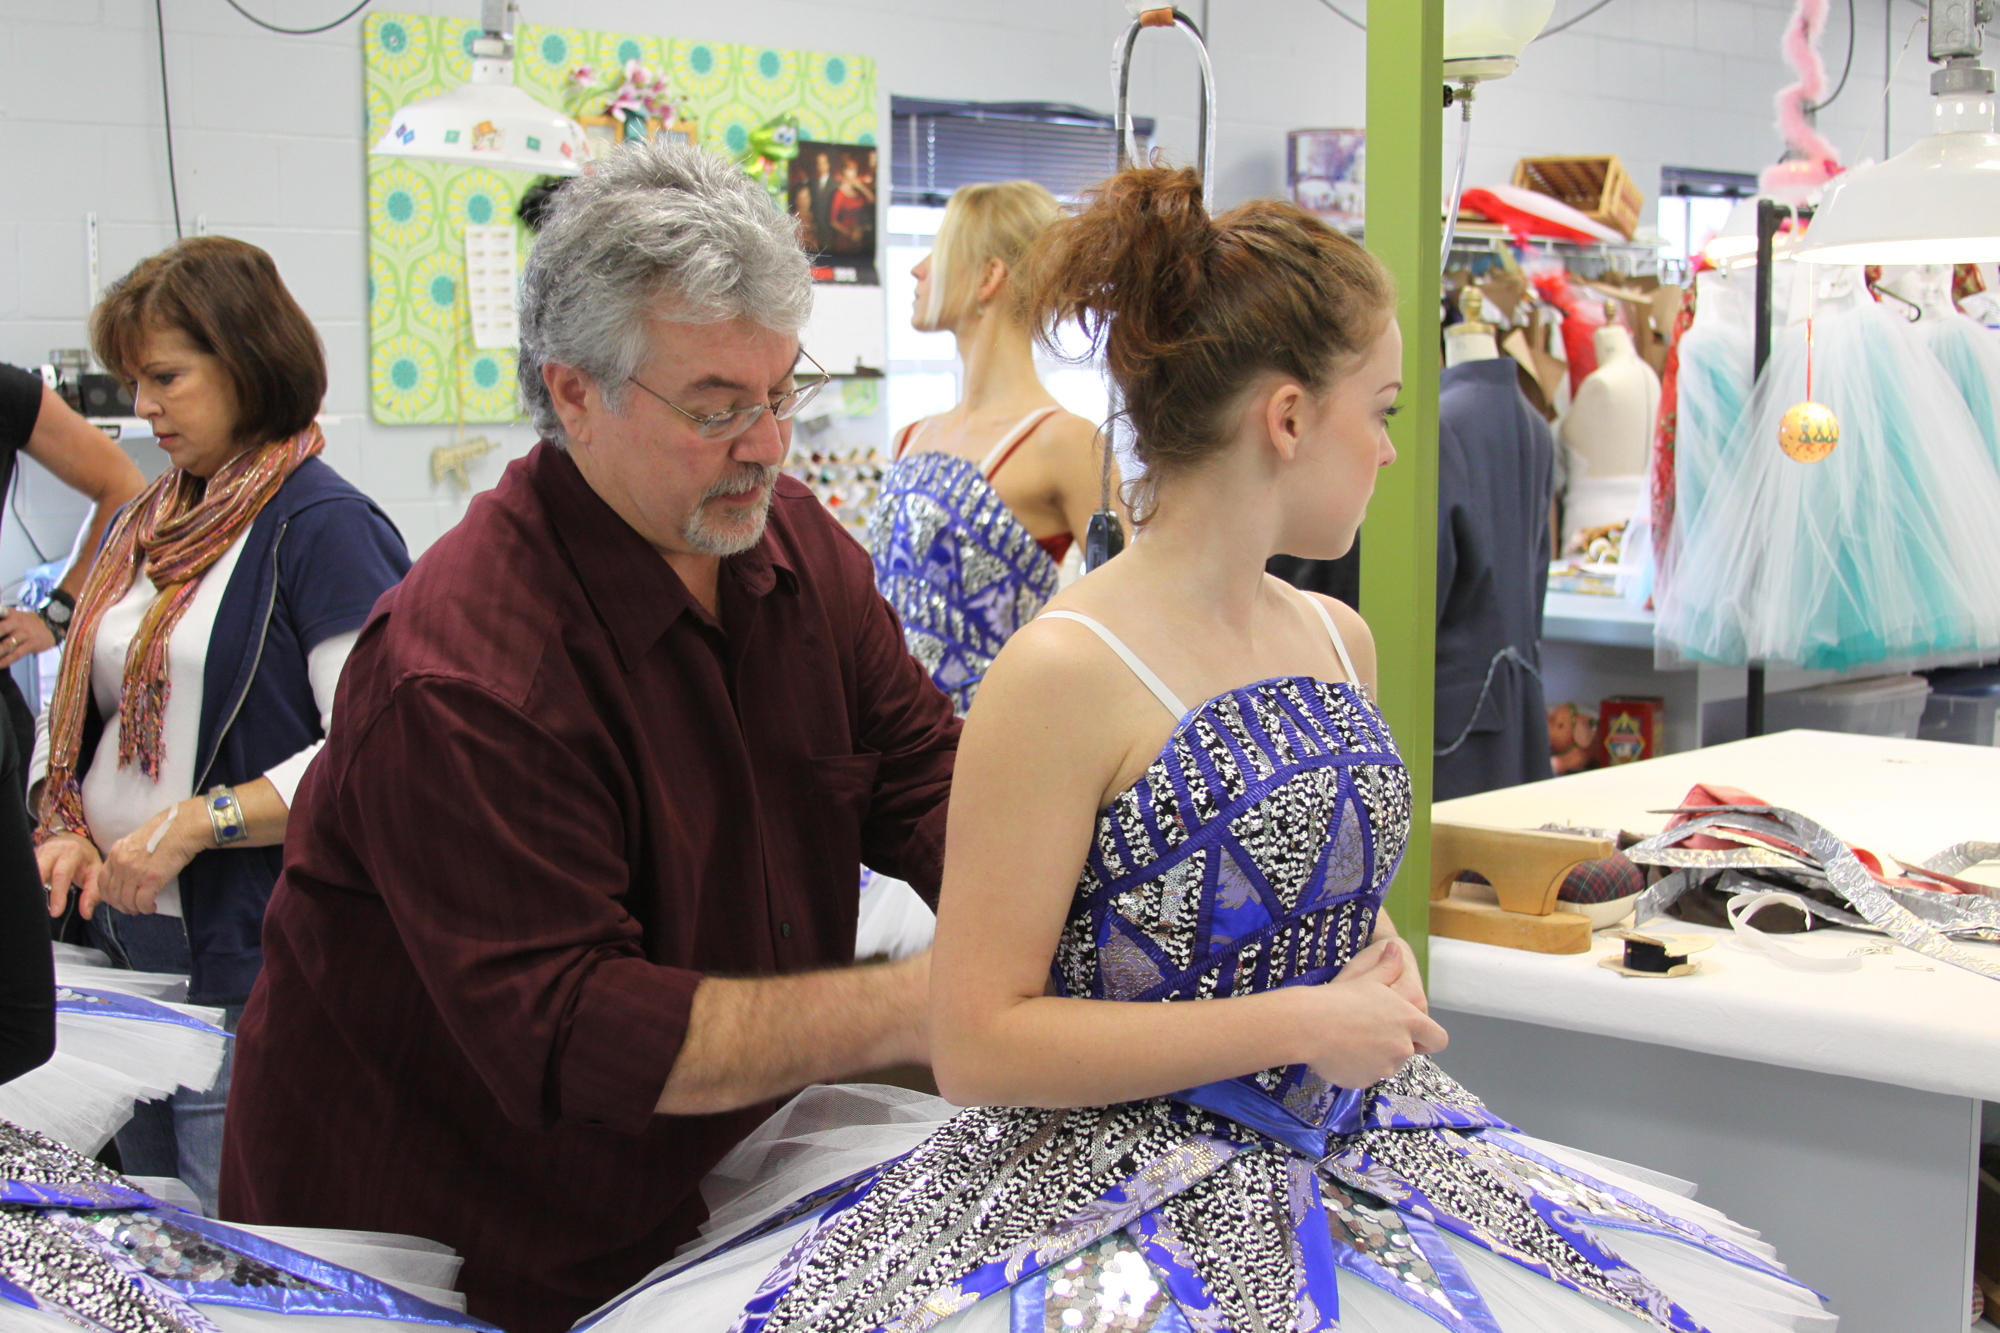 Costume shop manger David M. Covach and his staff at the Asolo Repertory Theatre’s costume shop help fit and create the Sarasota Ballet’s circus-inspired costumes during the show’s original 2012 run.